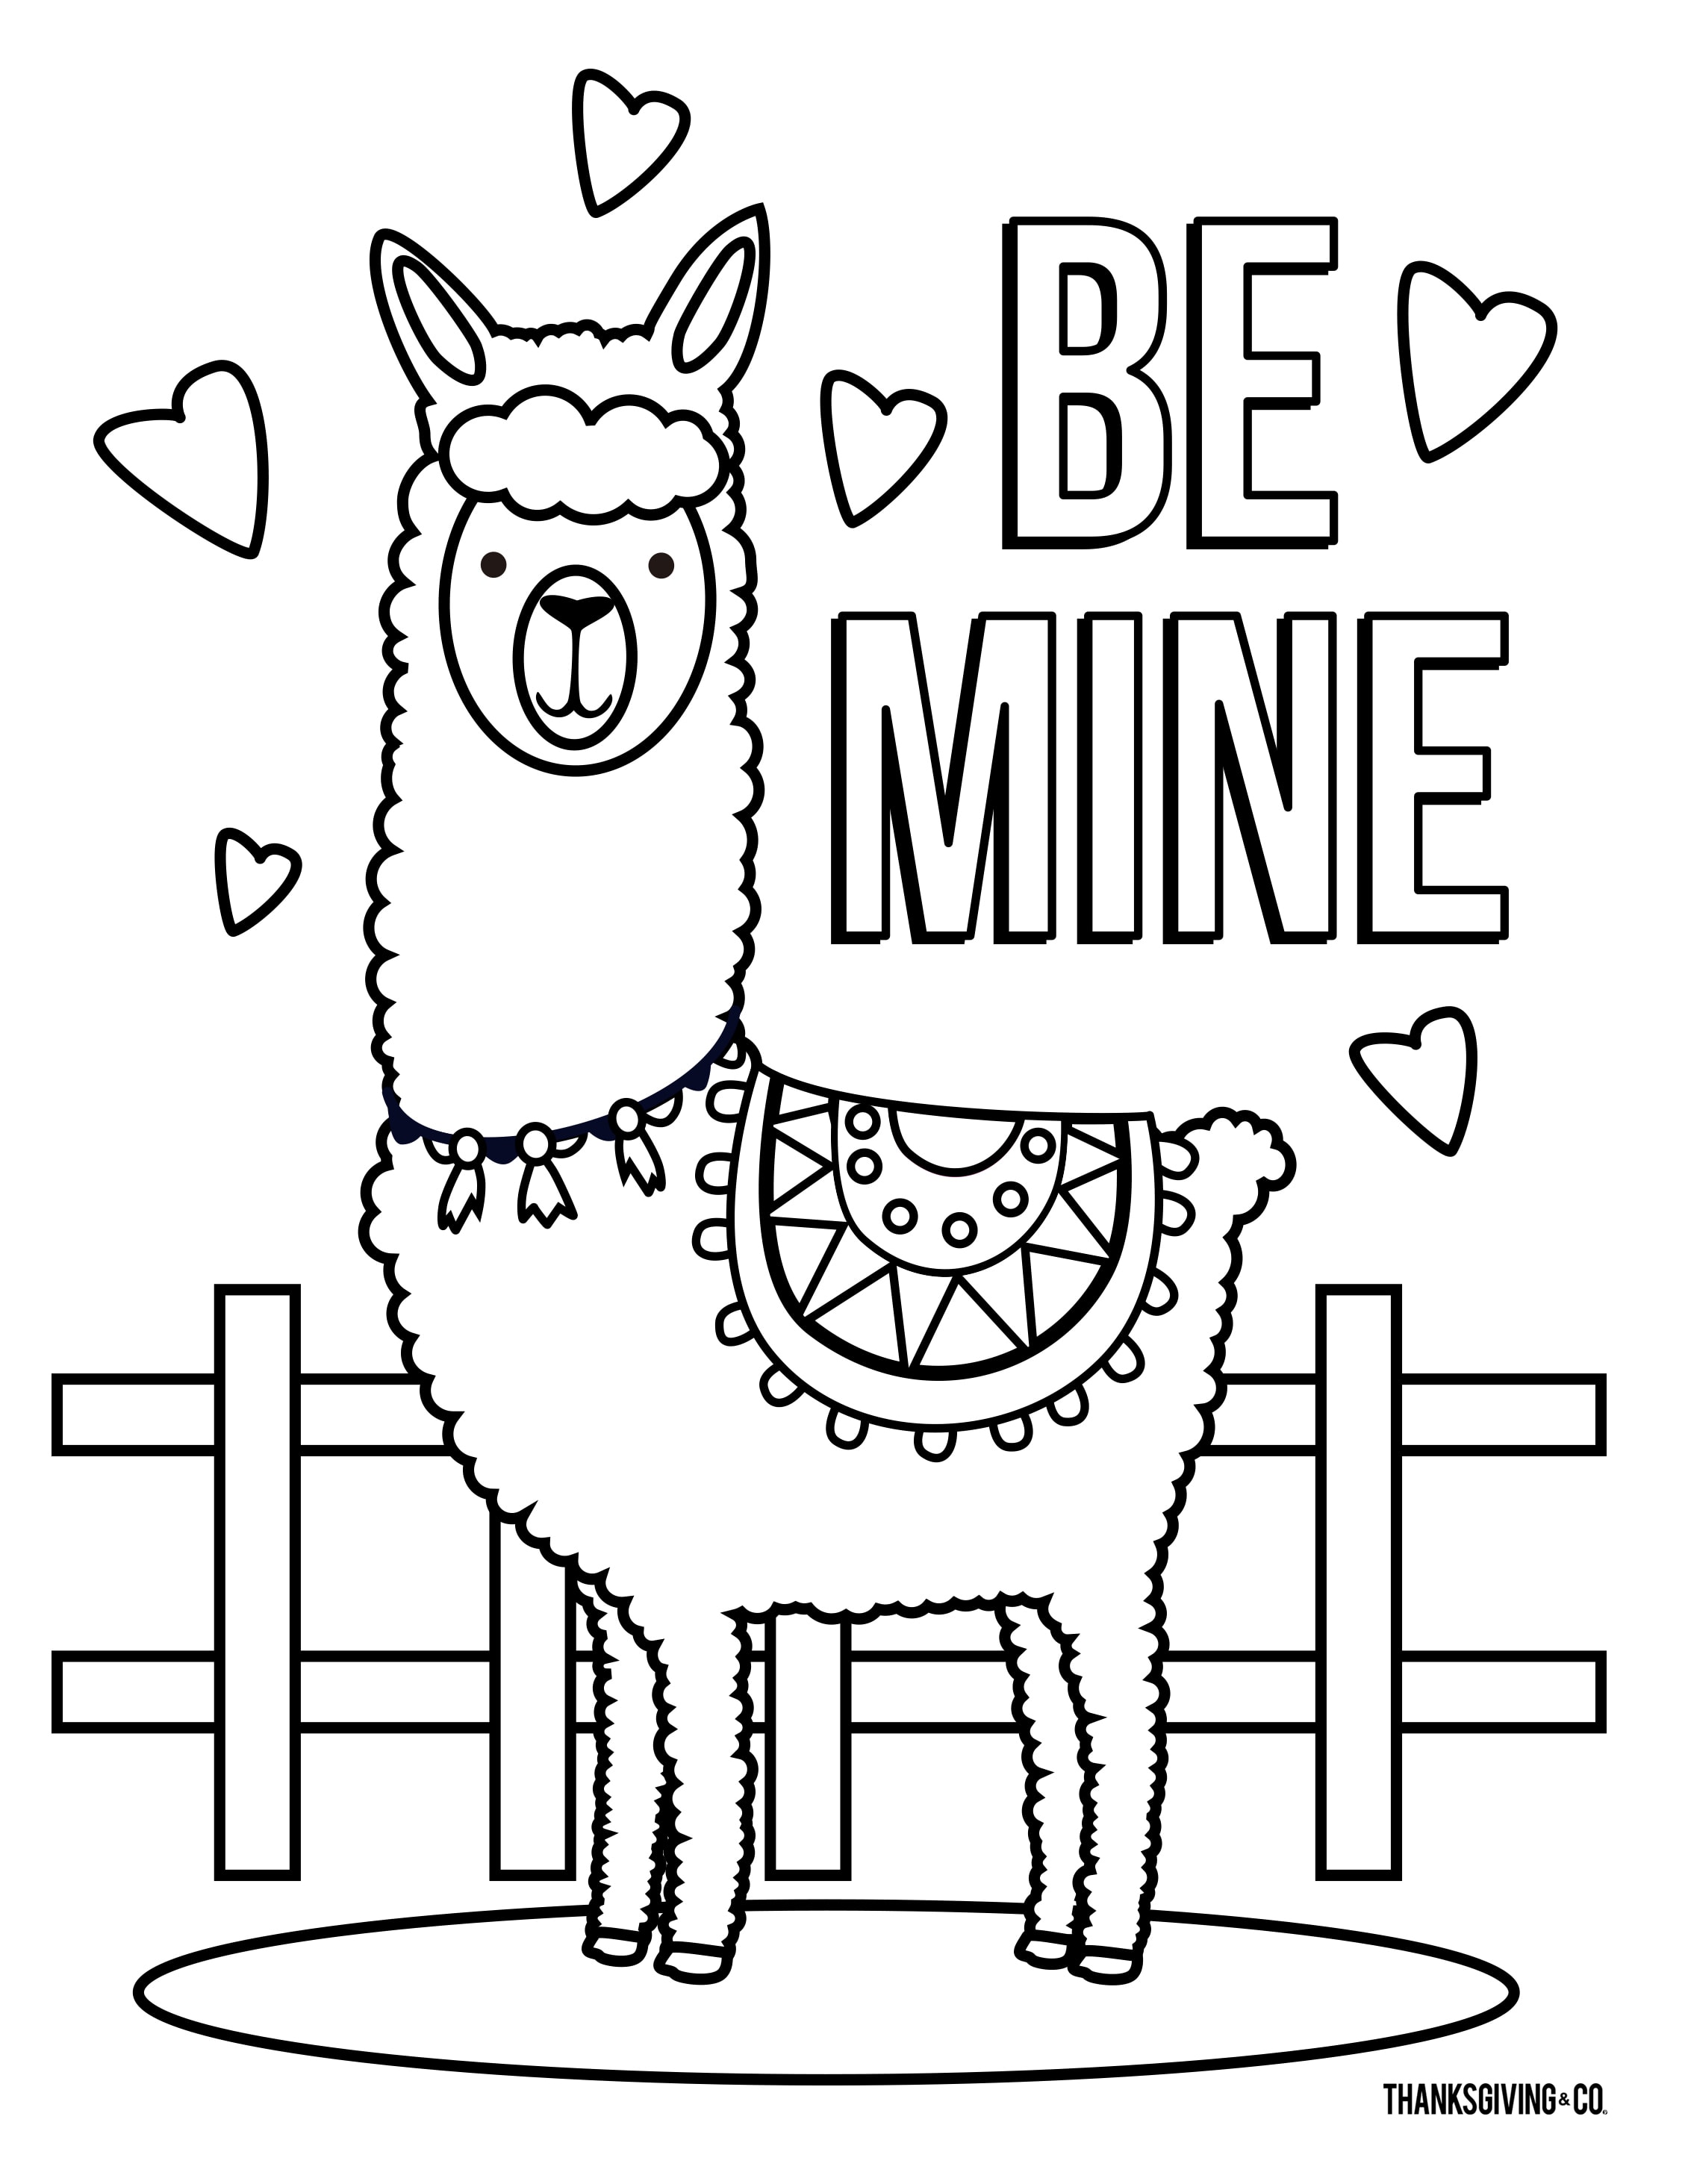 20 free Valentine's Day coloring pages for kids